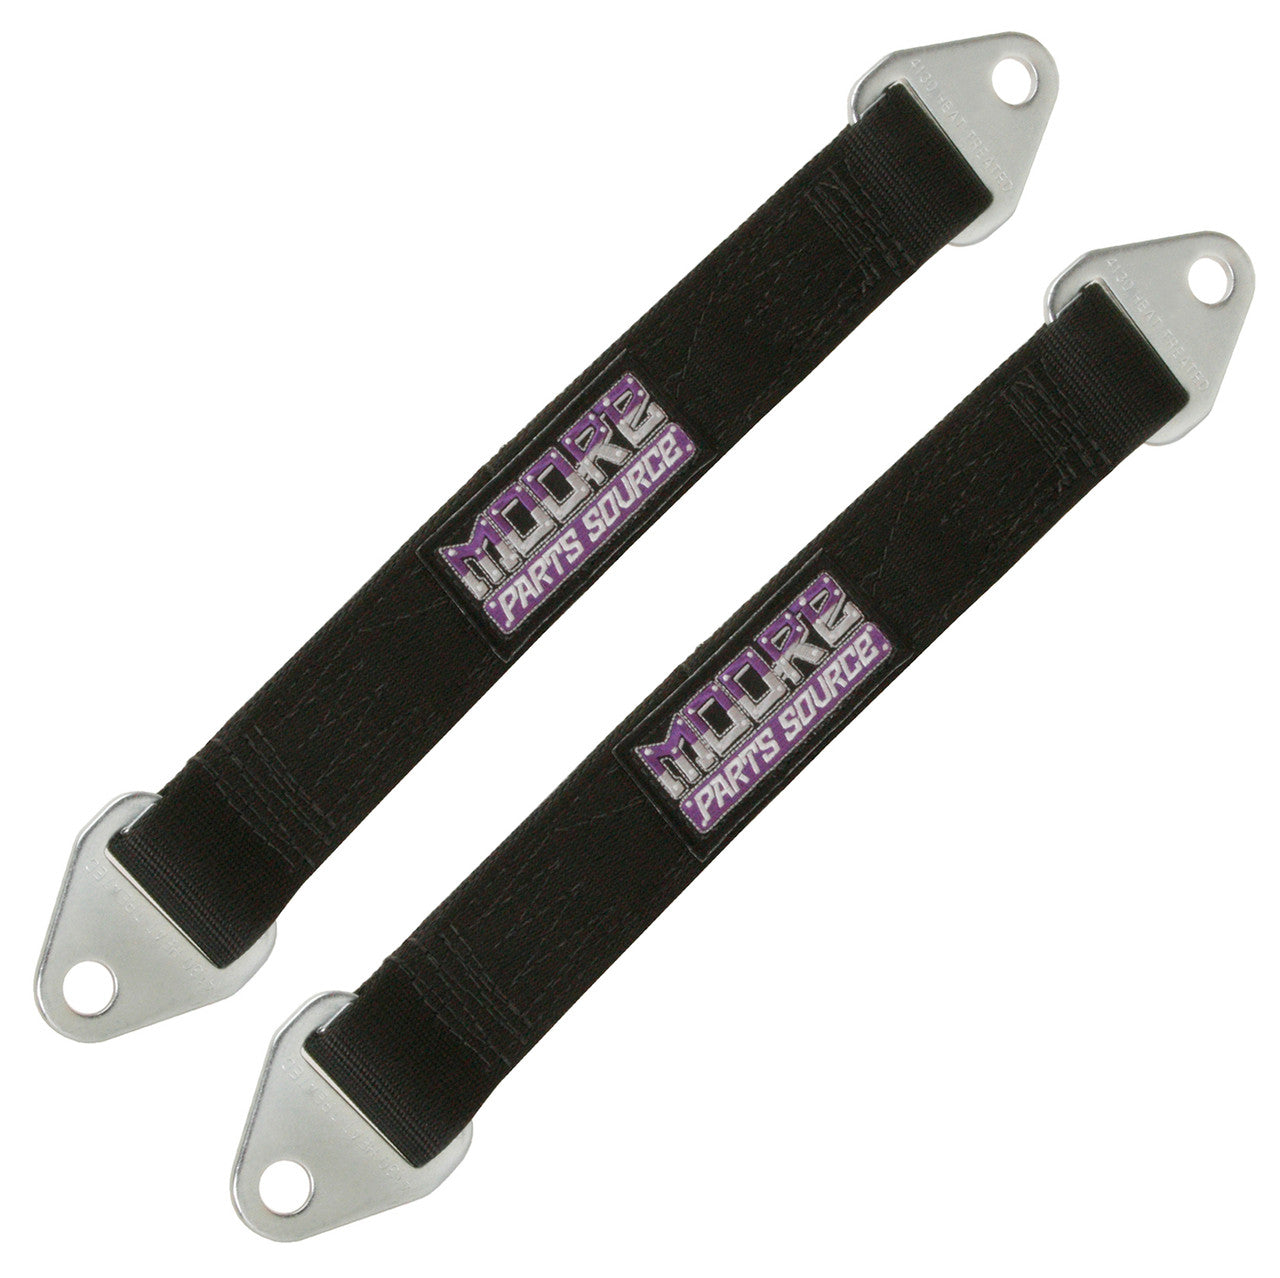 24 Inch USA Made Off-Road Suspension Limit Straps, Sold As Pair